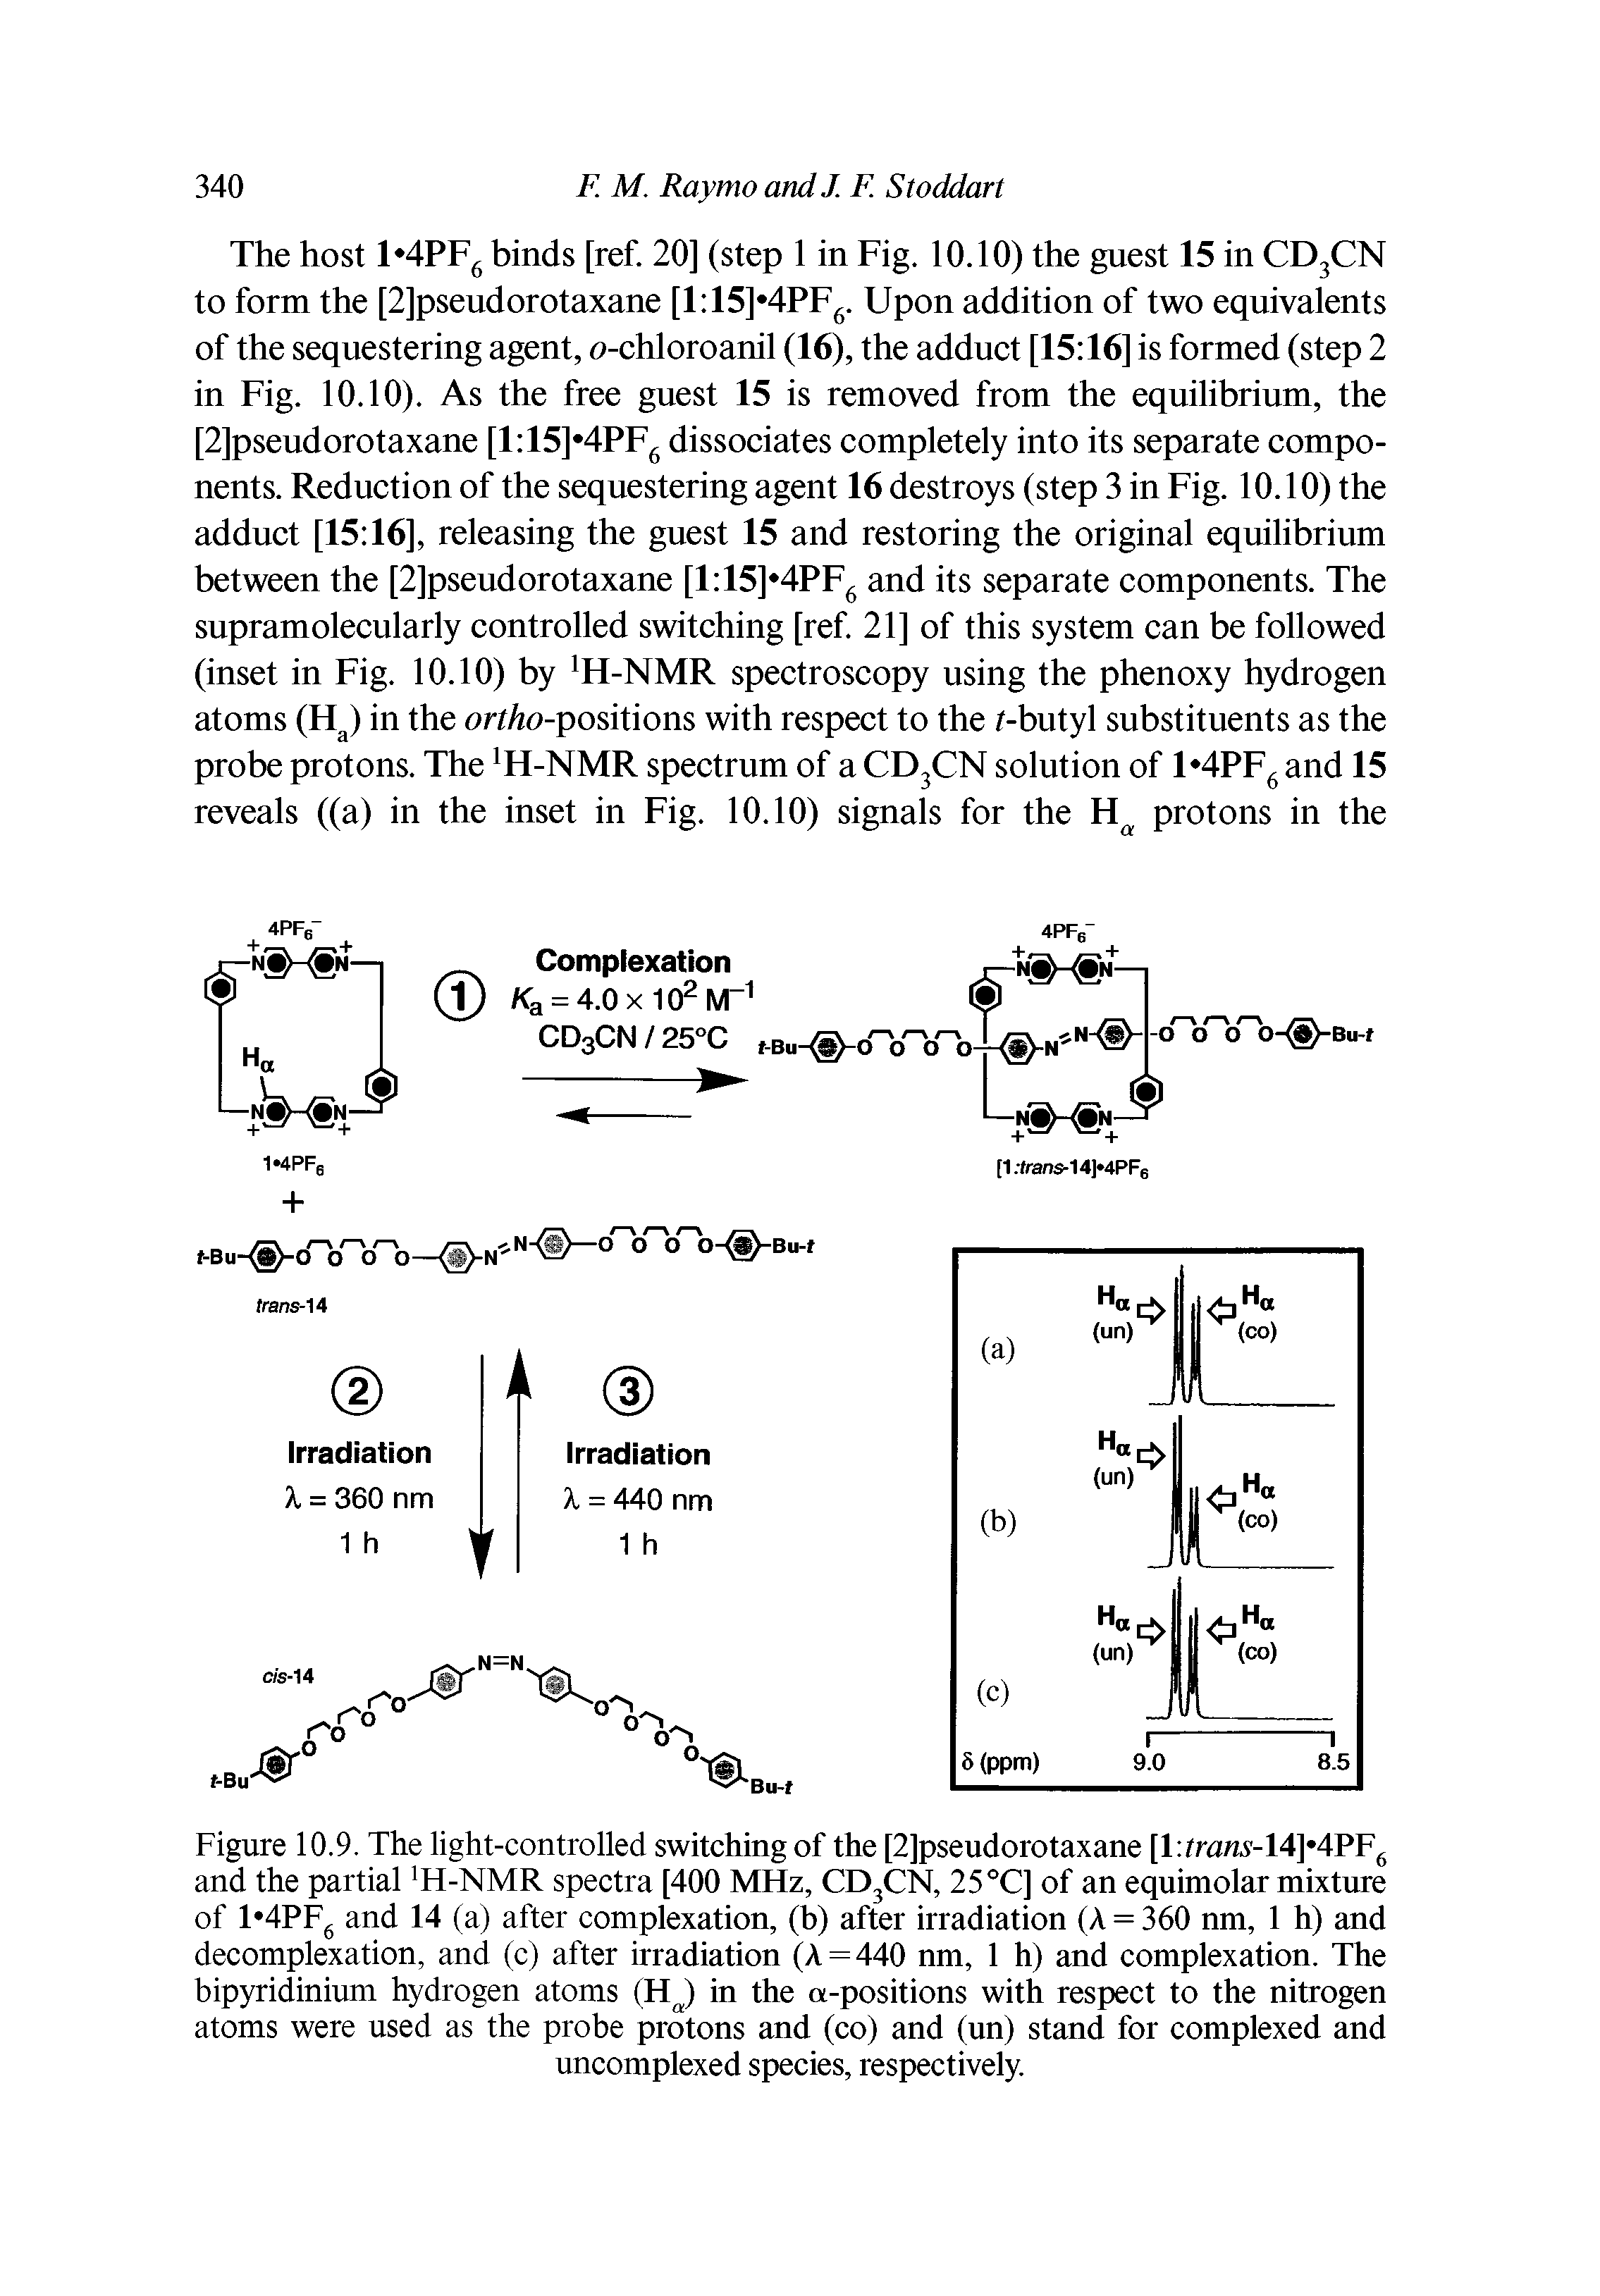 Figure 10.9. The light-controlled switching of the [2]pseudorotaxane [l ran.v-14] 4PF6 and the partial H-NMR spectra [400 MHz, CD3CN, 25°C] of an equimolar mixture of 1 4PF6 and 14 (a) after complexation, (b) after irradiation (A = 360 nm, 1 h) and decomplexation, and (c) after irradiation (A = 440 nm, 1 h) and complexation. The bipyridinium hydrogen atoms (HJ in the a-positions with respect to the nitrogen atoms were used as the probe protons and (co) and (un) stand for complexed and...